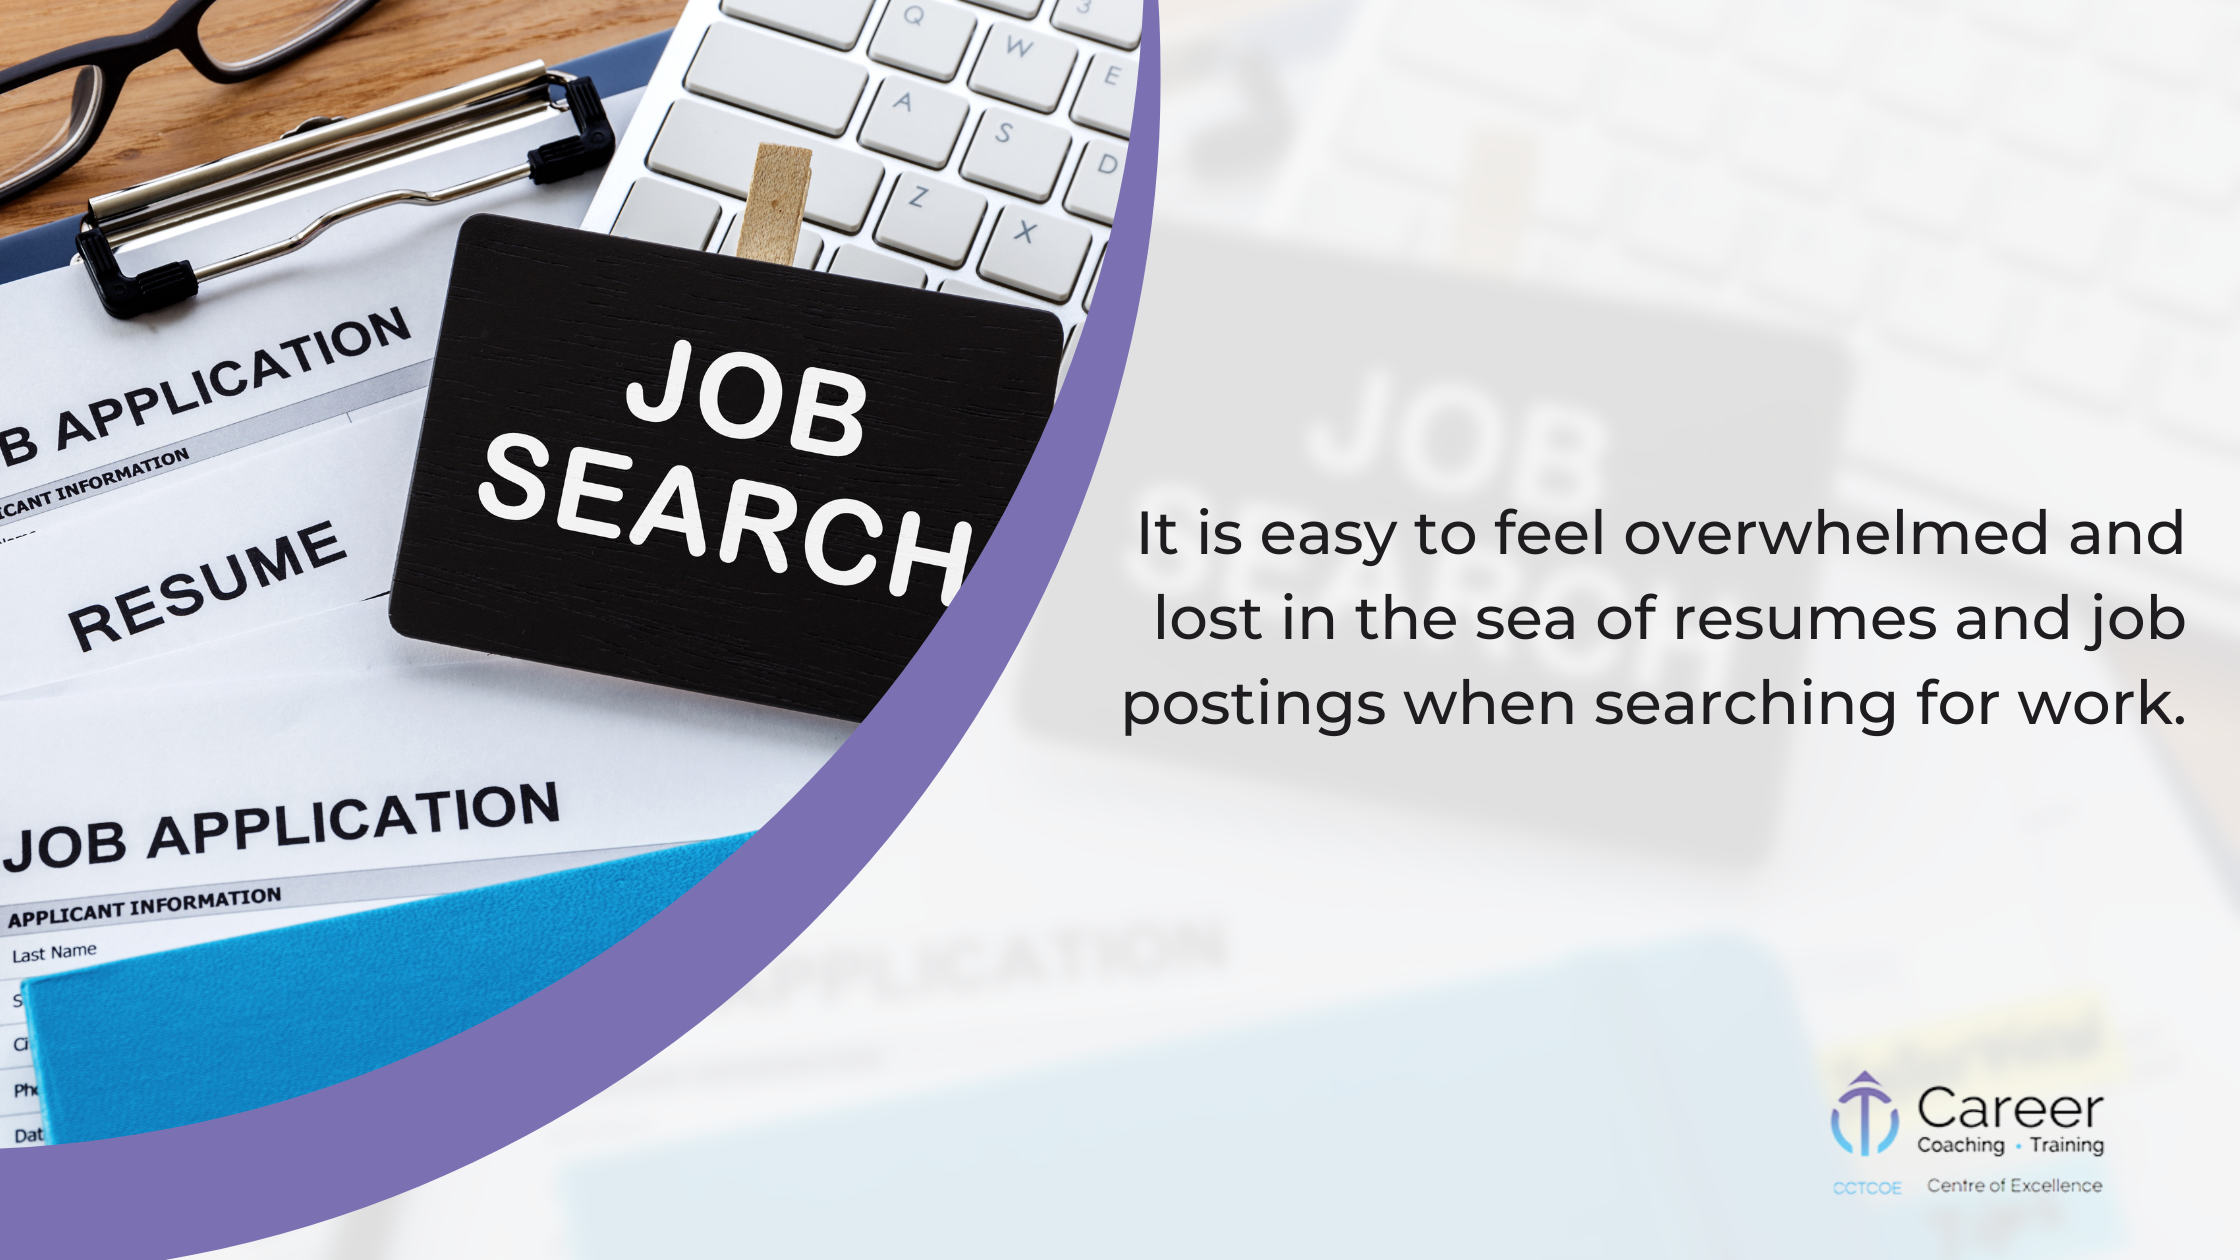 It_is_easy_to_feel_overwhelmed_and_lost_in_the_sea_of_resumes_and_job_postings_when_searching_for_work